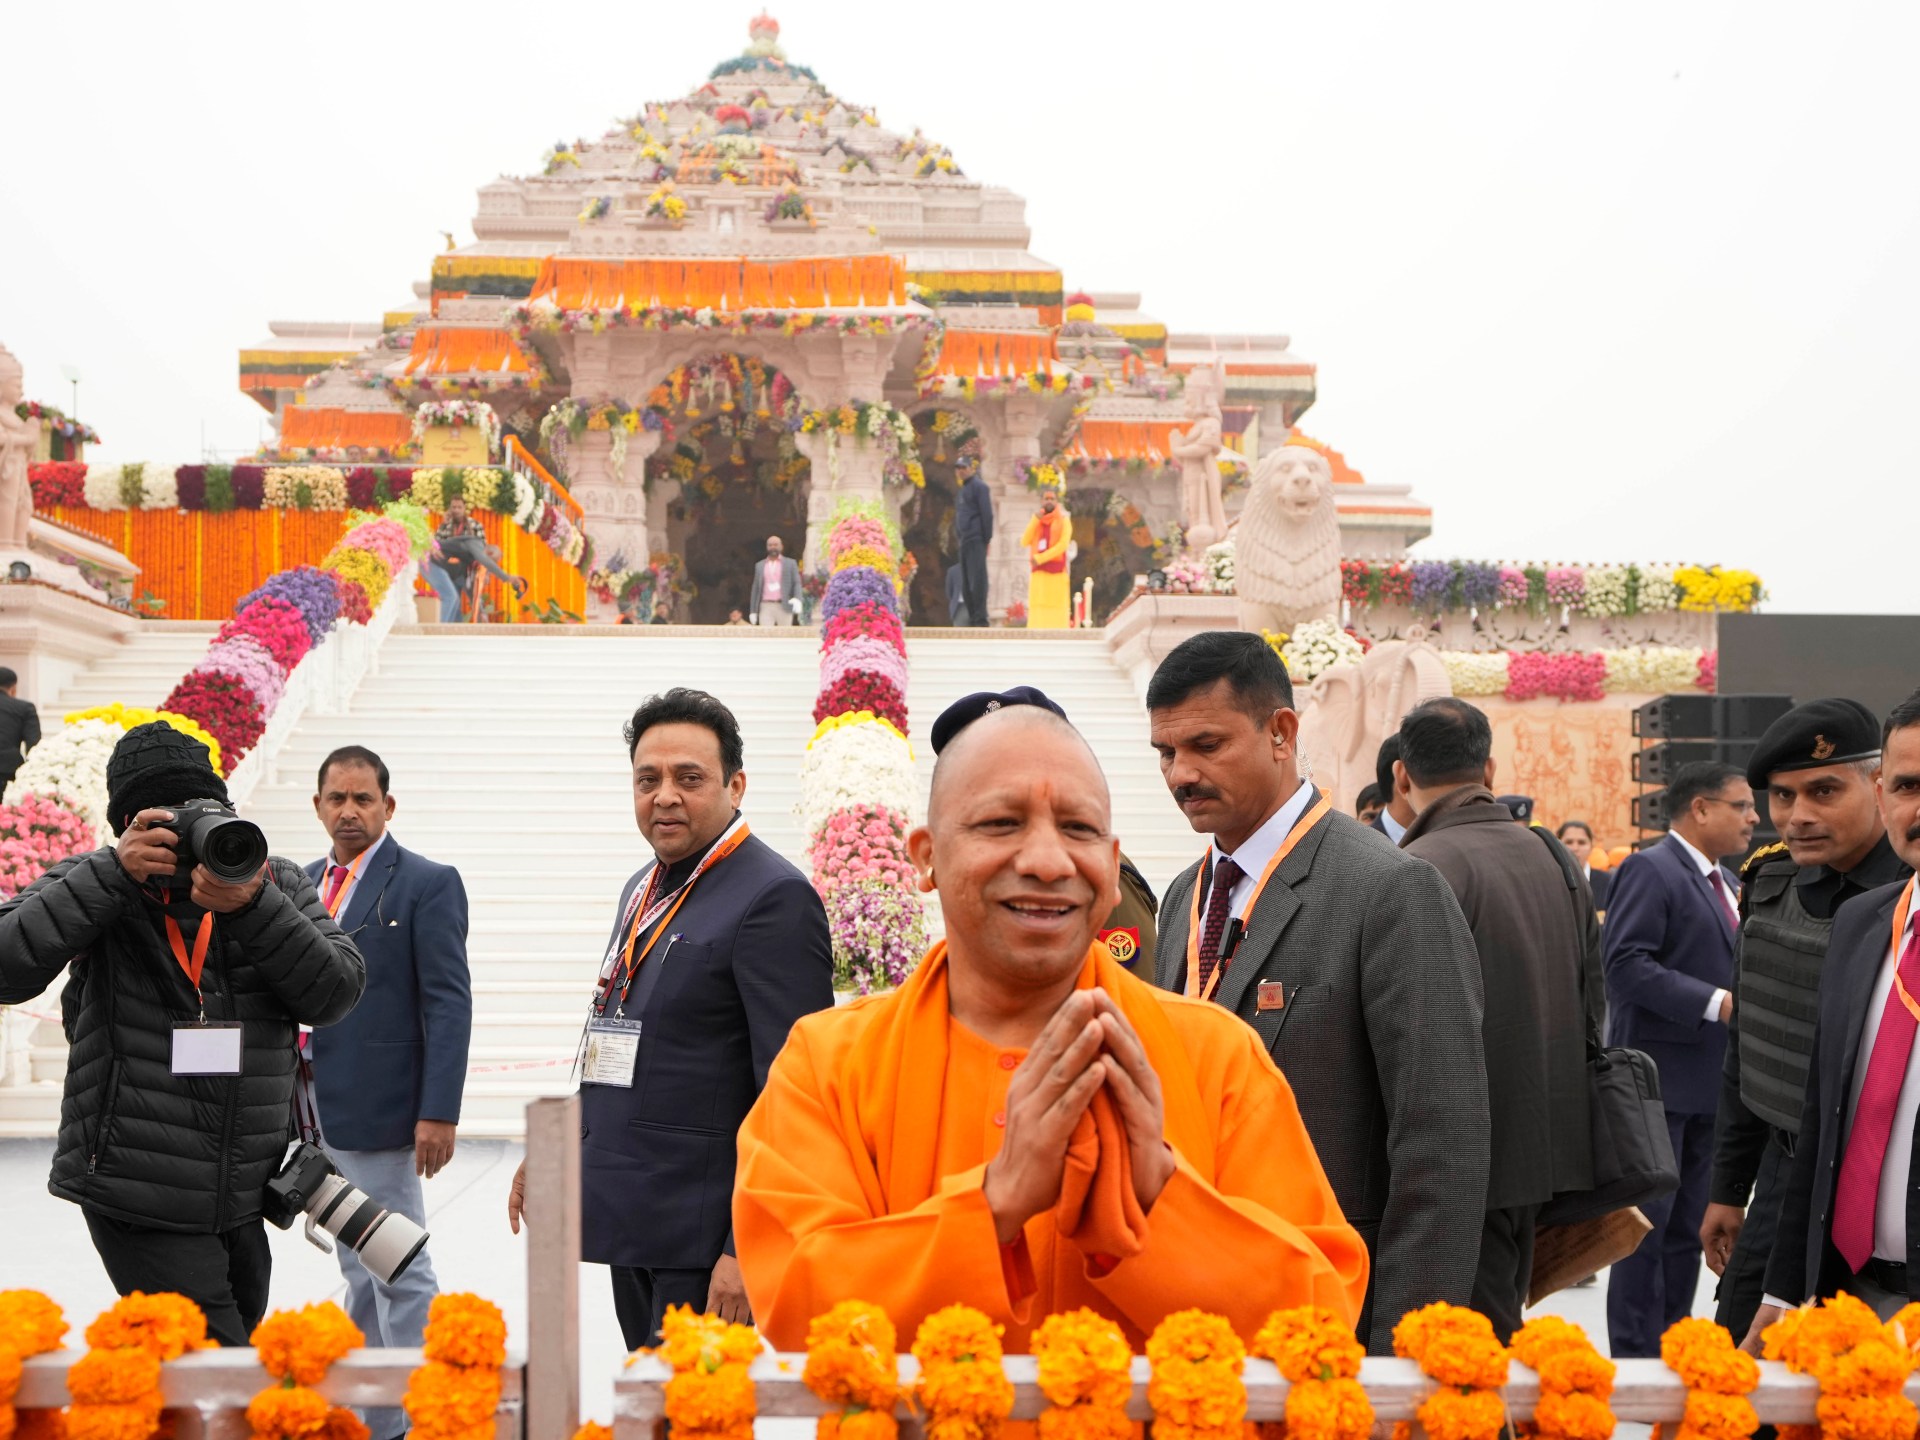 India’s Modi opens controversial Hindu temple in Ayodhya | Religion News